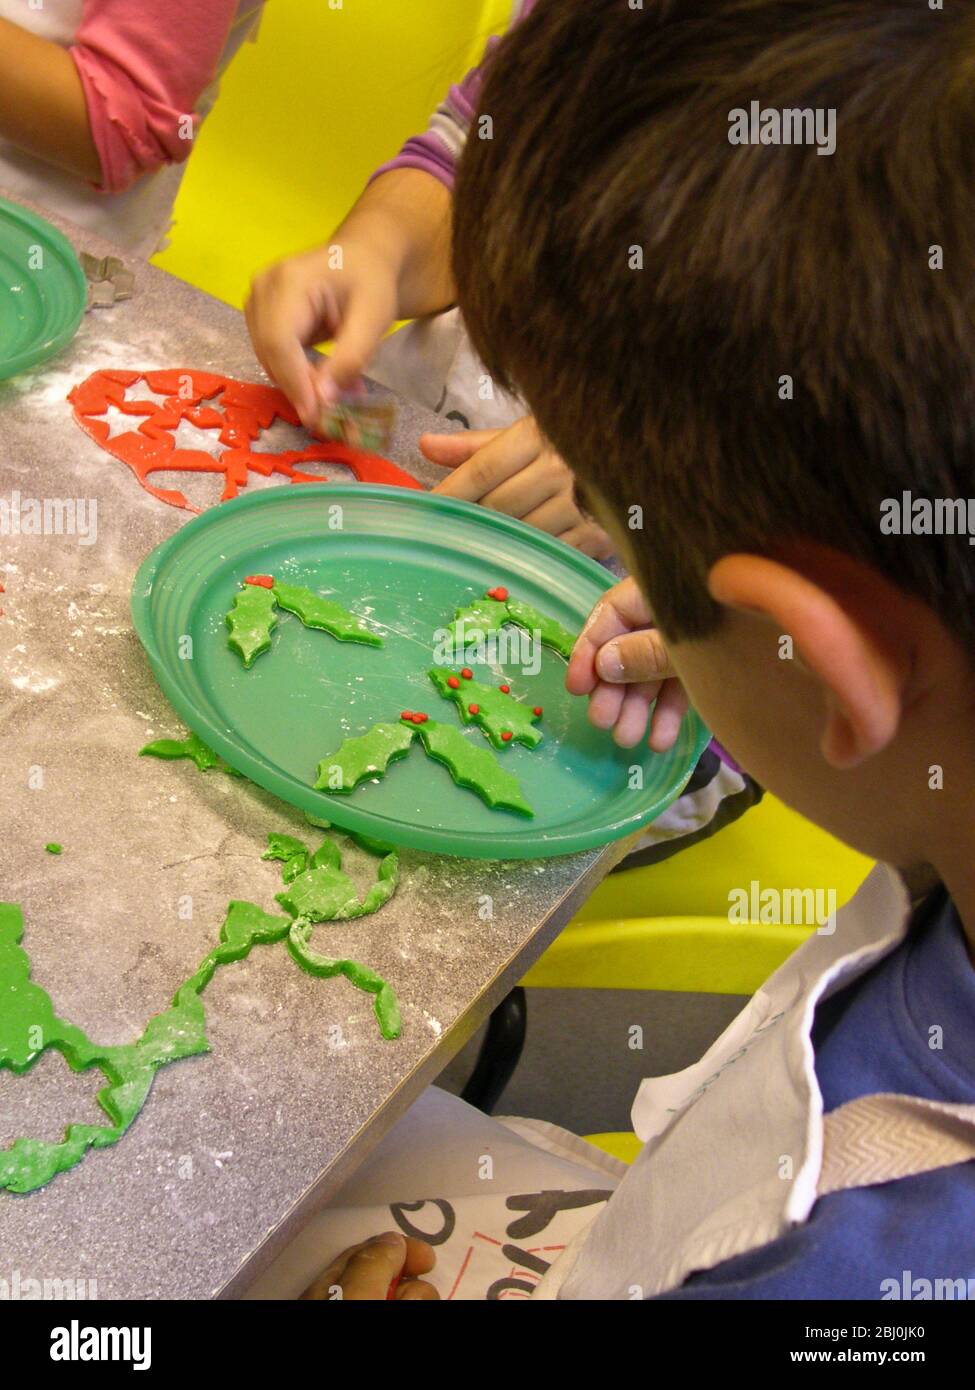 Children cutting out decorative Christmas shapes out of coloured fondant icing to decorate cakes - Stock Photo